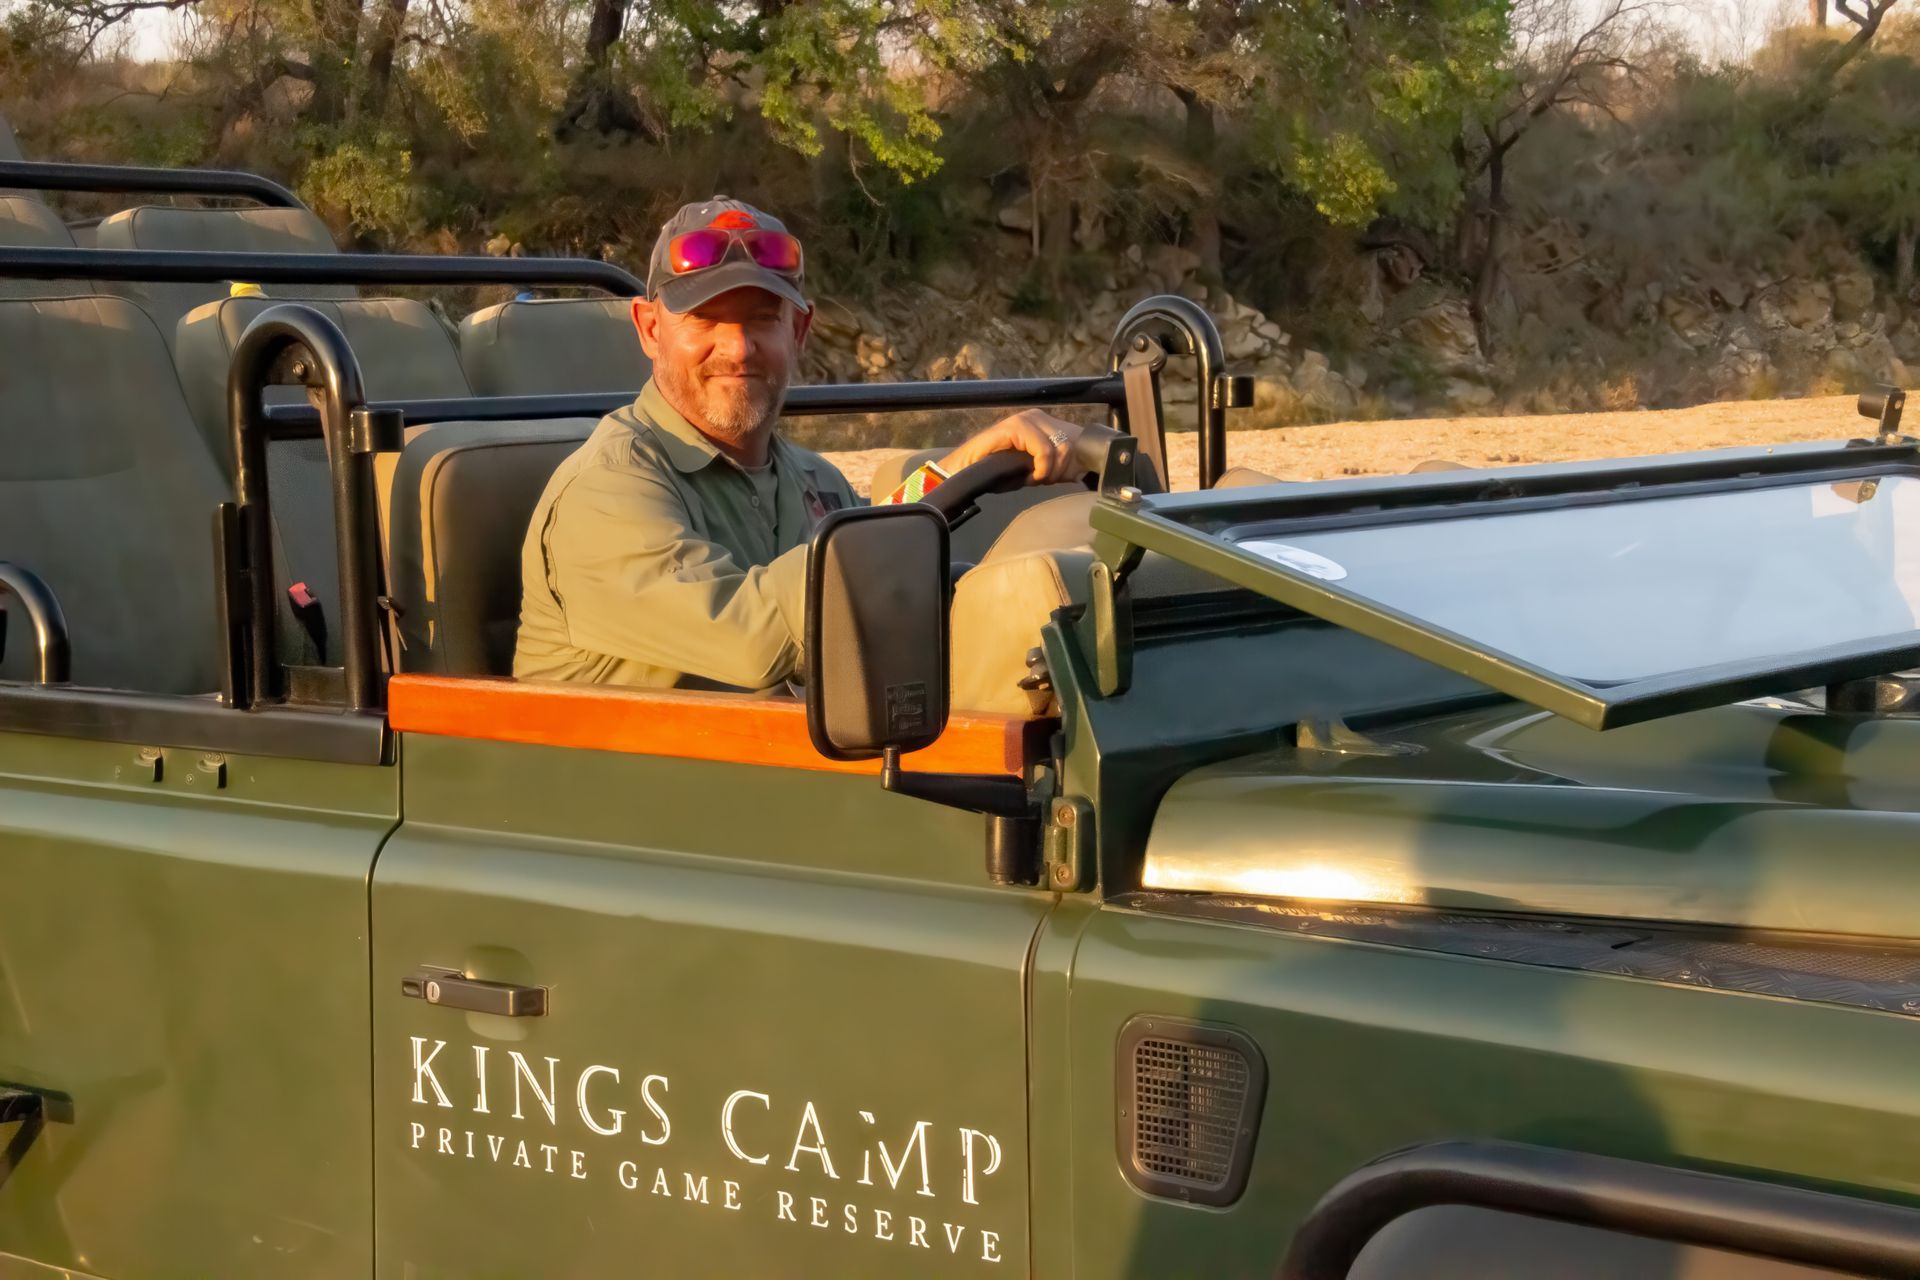 Martin Meyer Private Guide  is sitting in the driver 's seat of a kings camp vehicle .